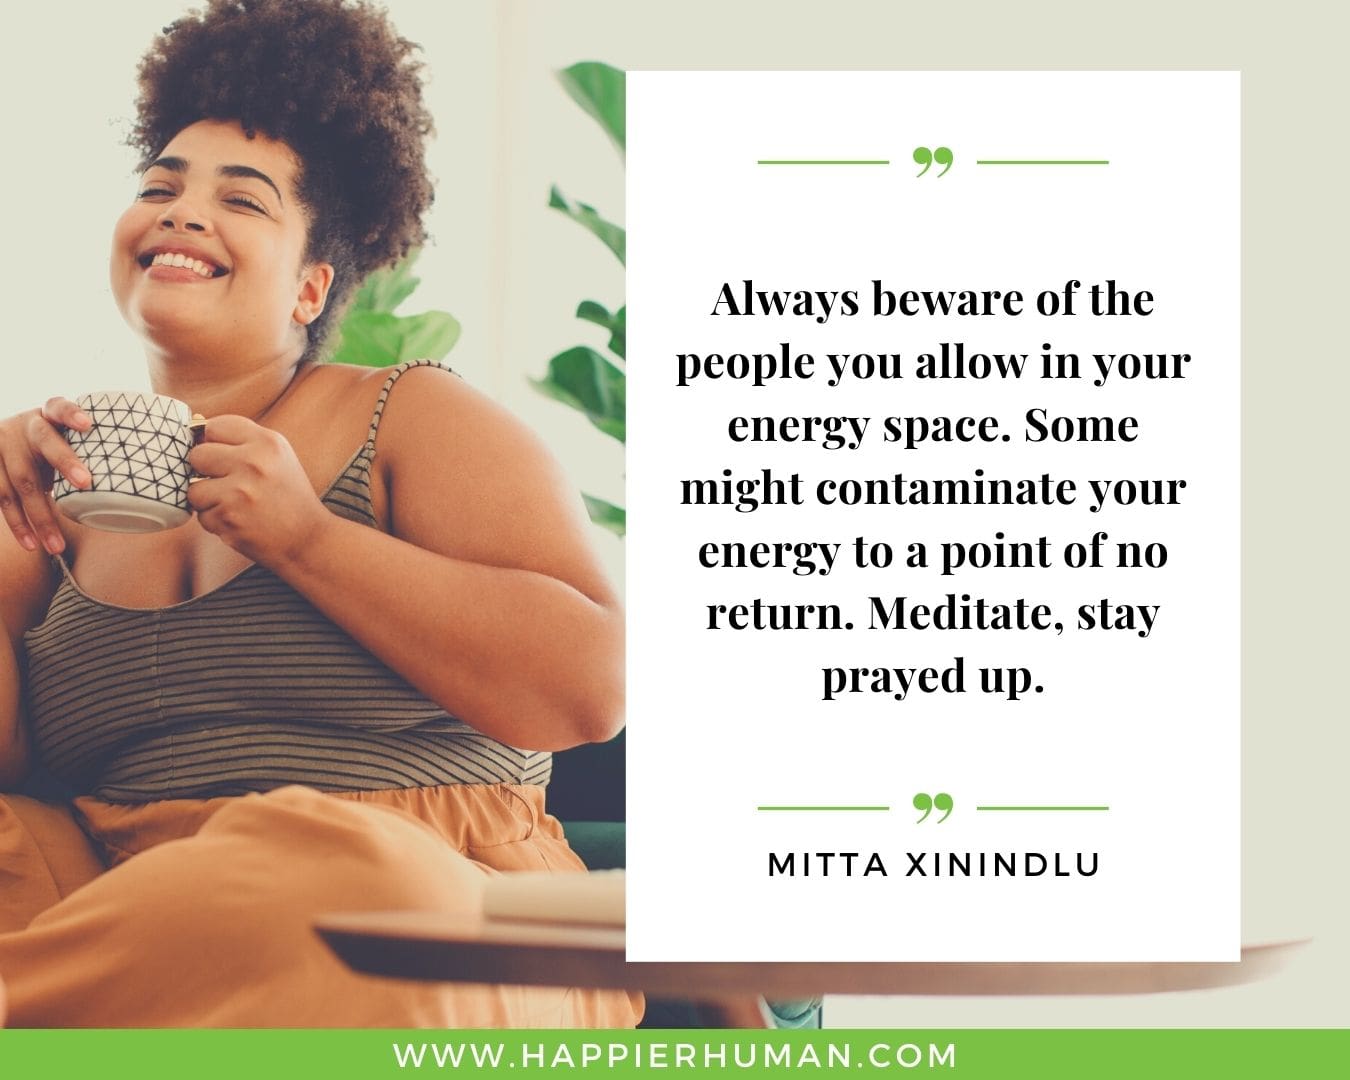 Positive Energy Quotes - “Always beware of the people you allow in your energy space. Some might contaminate your energy to a point of no return. Meditate, stay prayed up.” - Mitta Xinindlu